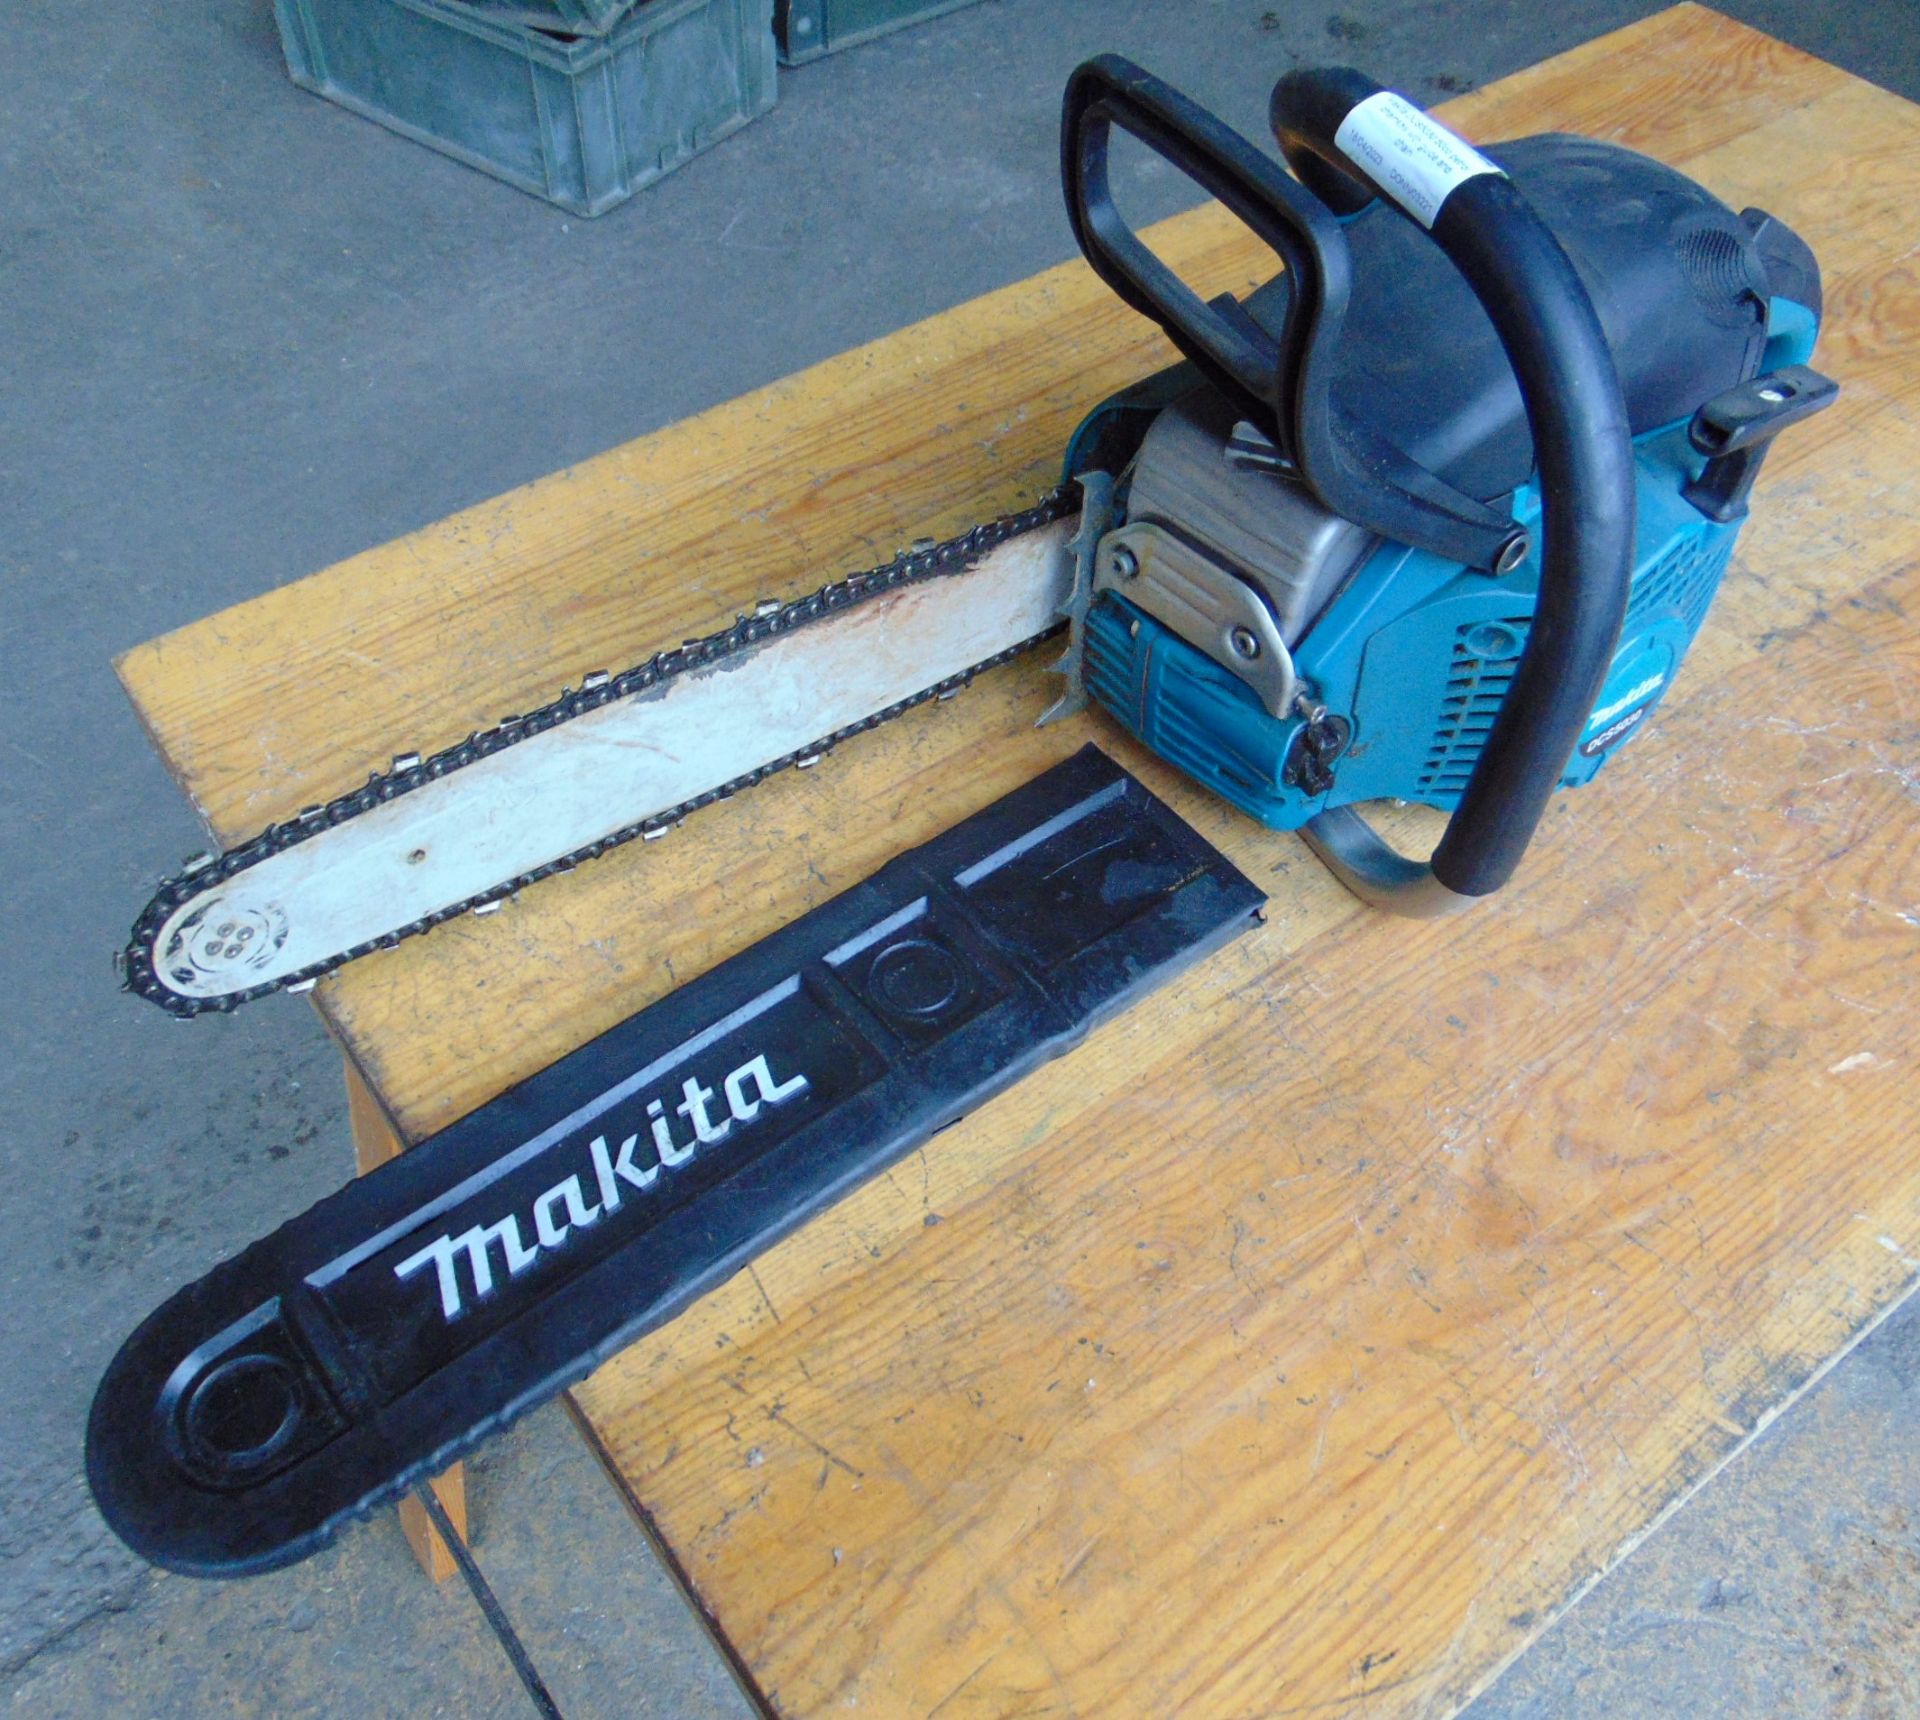 MAKITA DCS 5030 50CC Chainsaw c/w Chain Guard from MoD. - Image 4 of 5